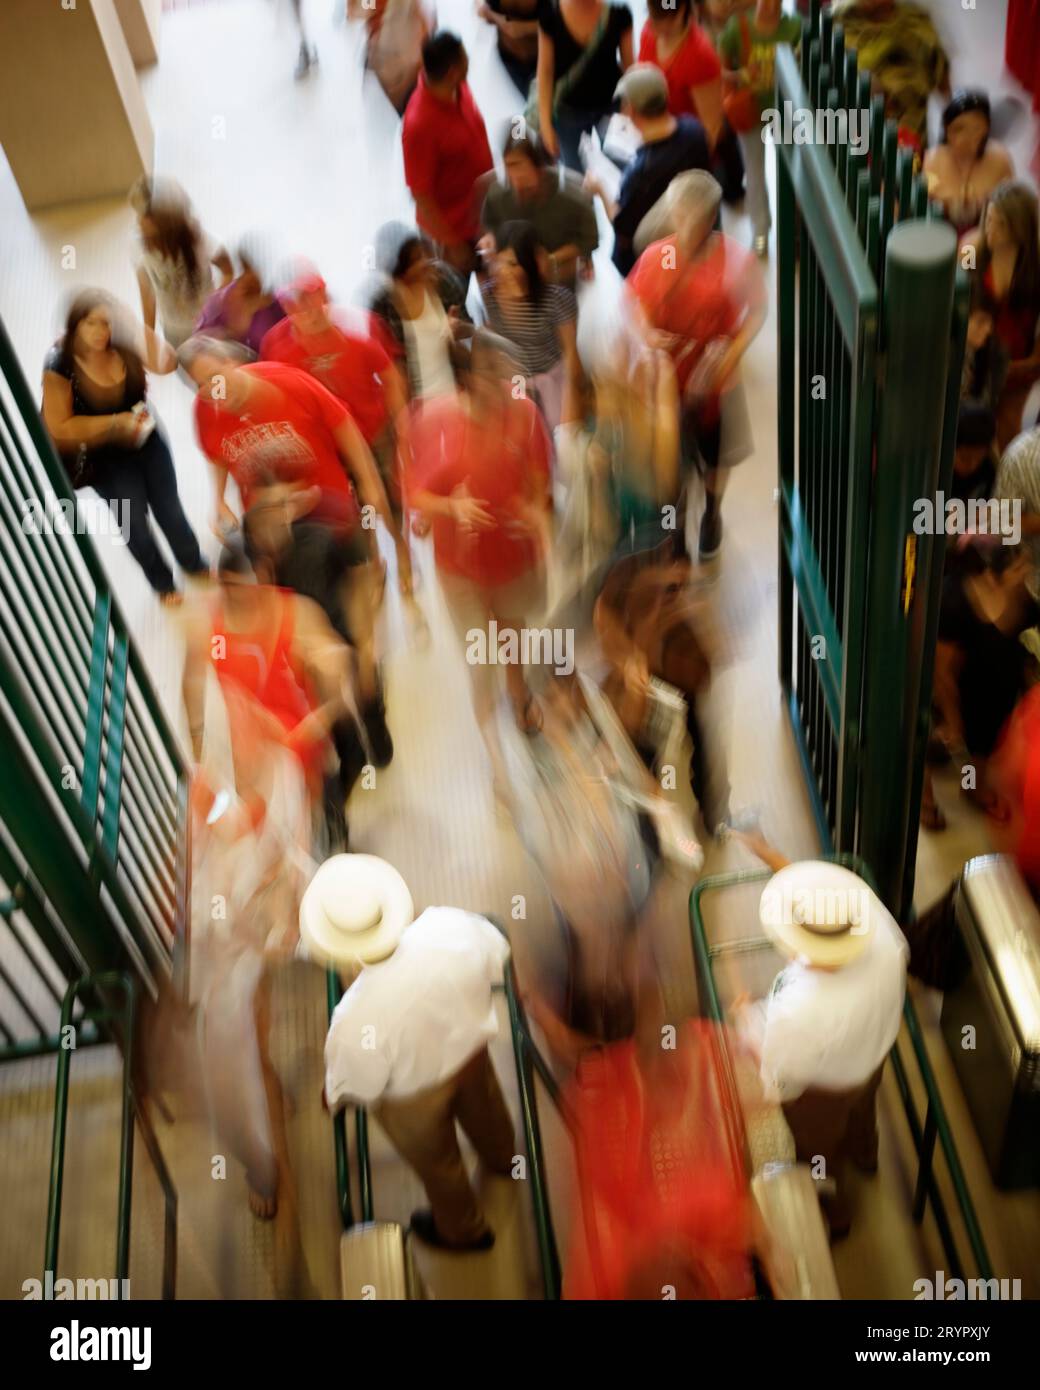 High angle view of baseball fans entering the Angel Stadium of Anaheim, California. Intentional motion blur. Stock Photo